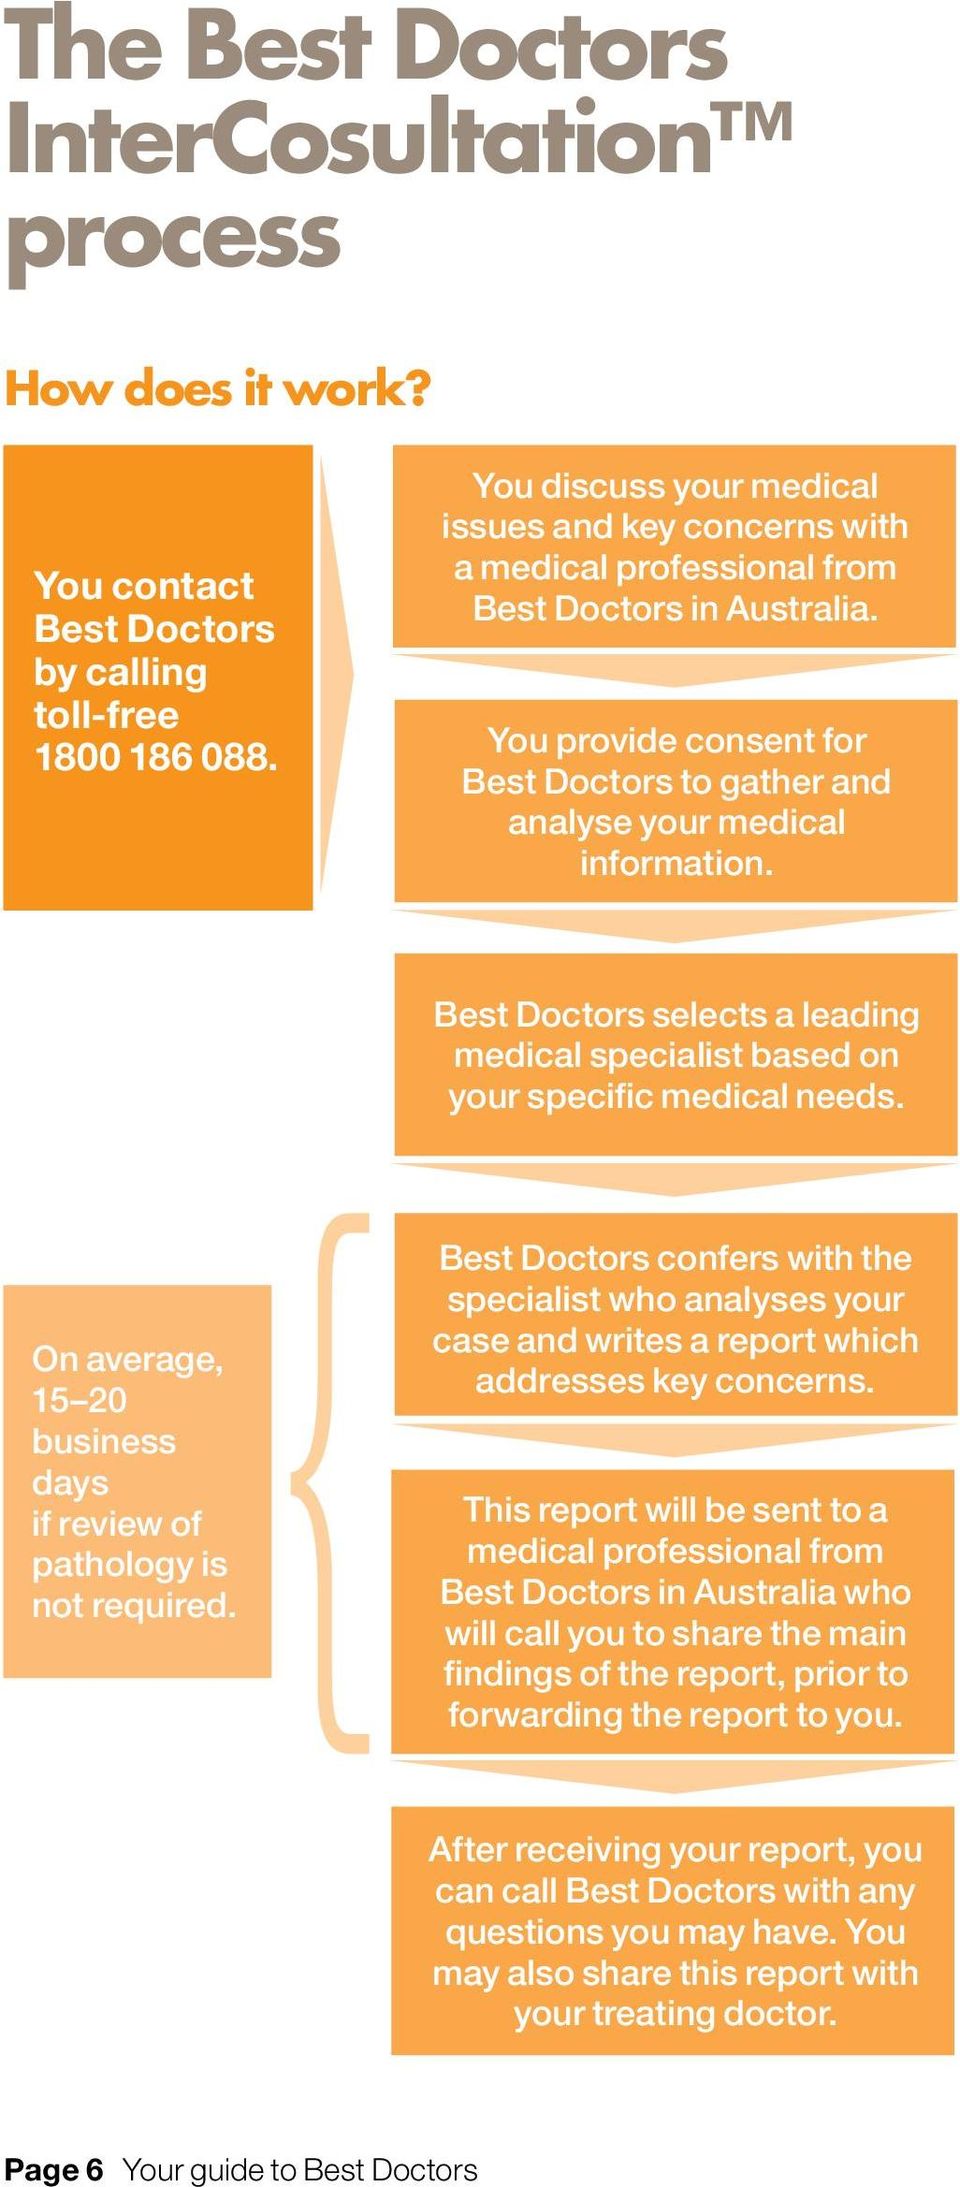 Best Doctors selects a leading medical specialist based on your specific medical needs. On average, 15 20 business days if review of pathology is not required.